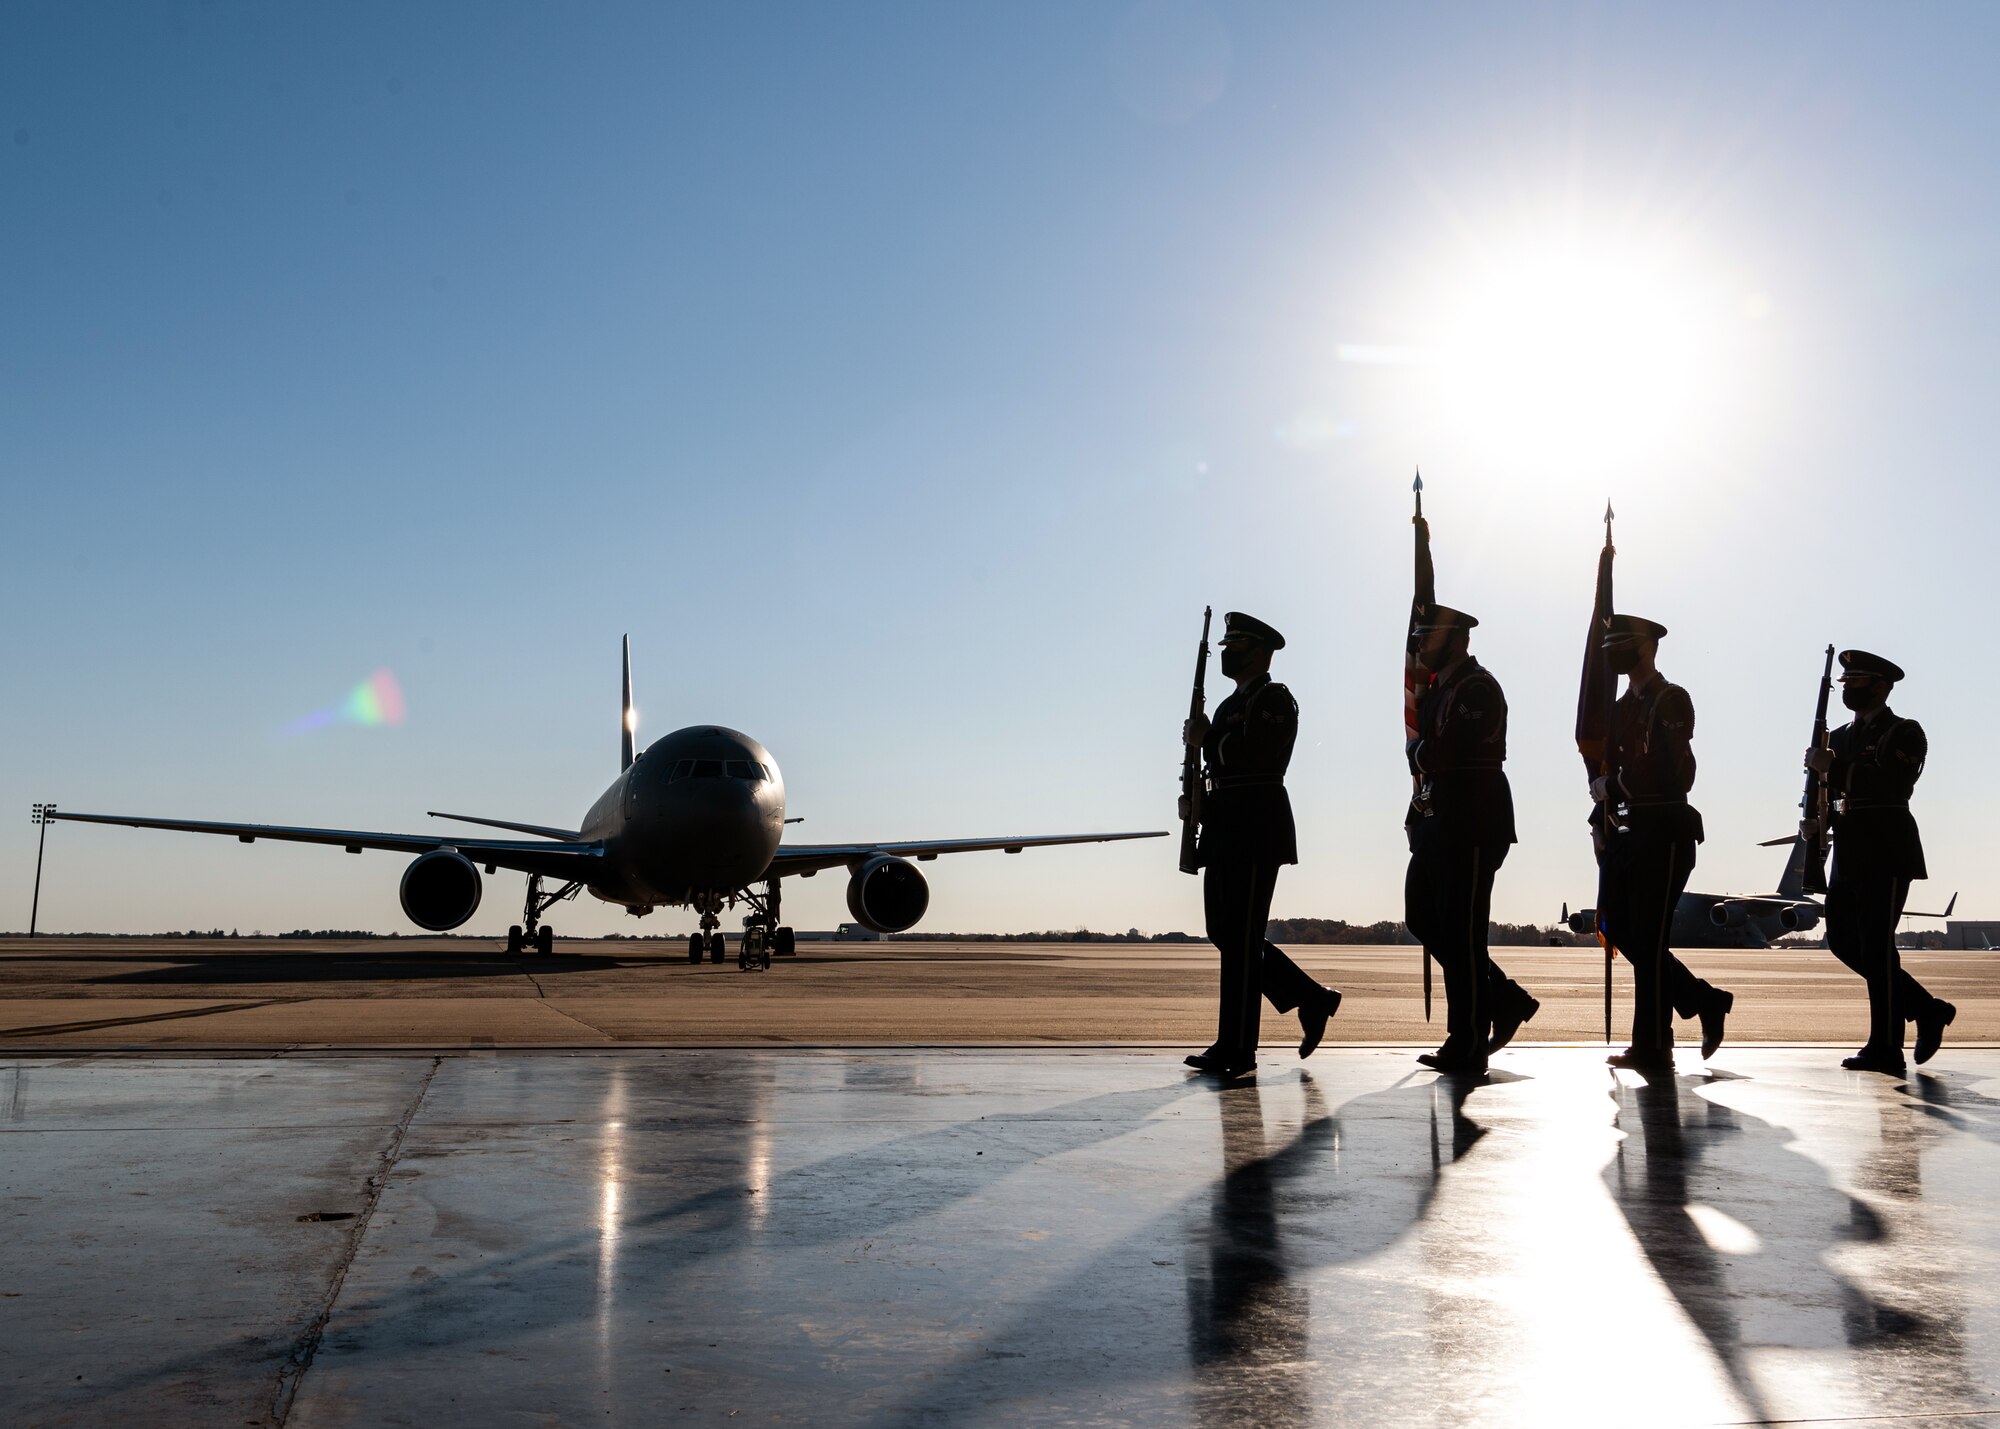 The joint base honor guard marches past a KC-46A Pegasus as part of a welcome ceremony at Joint Base McGuire-Dix-Lakehurst